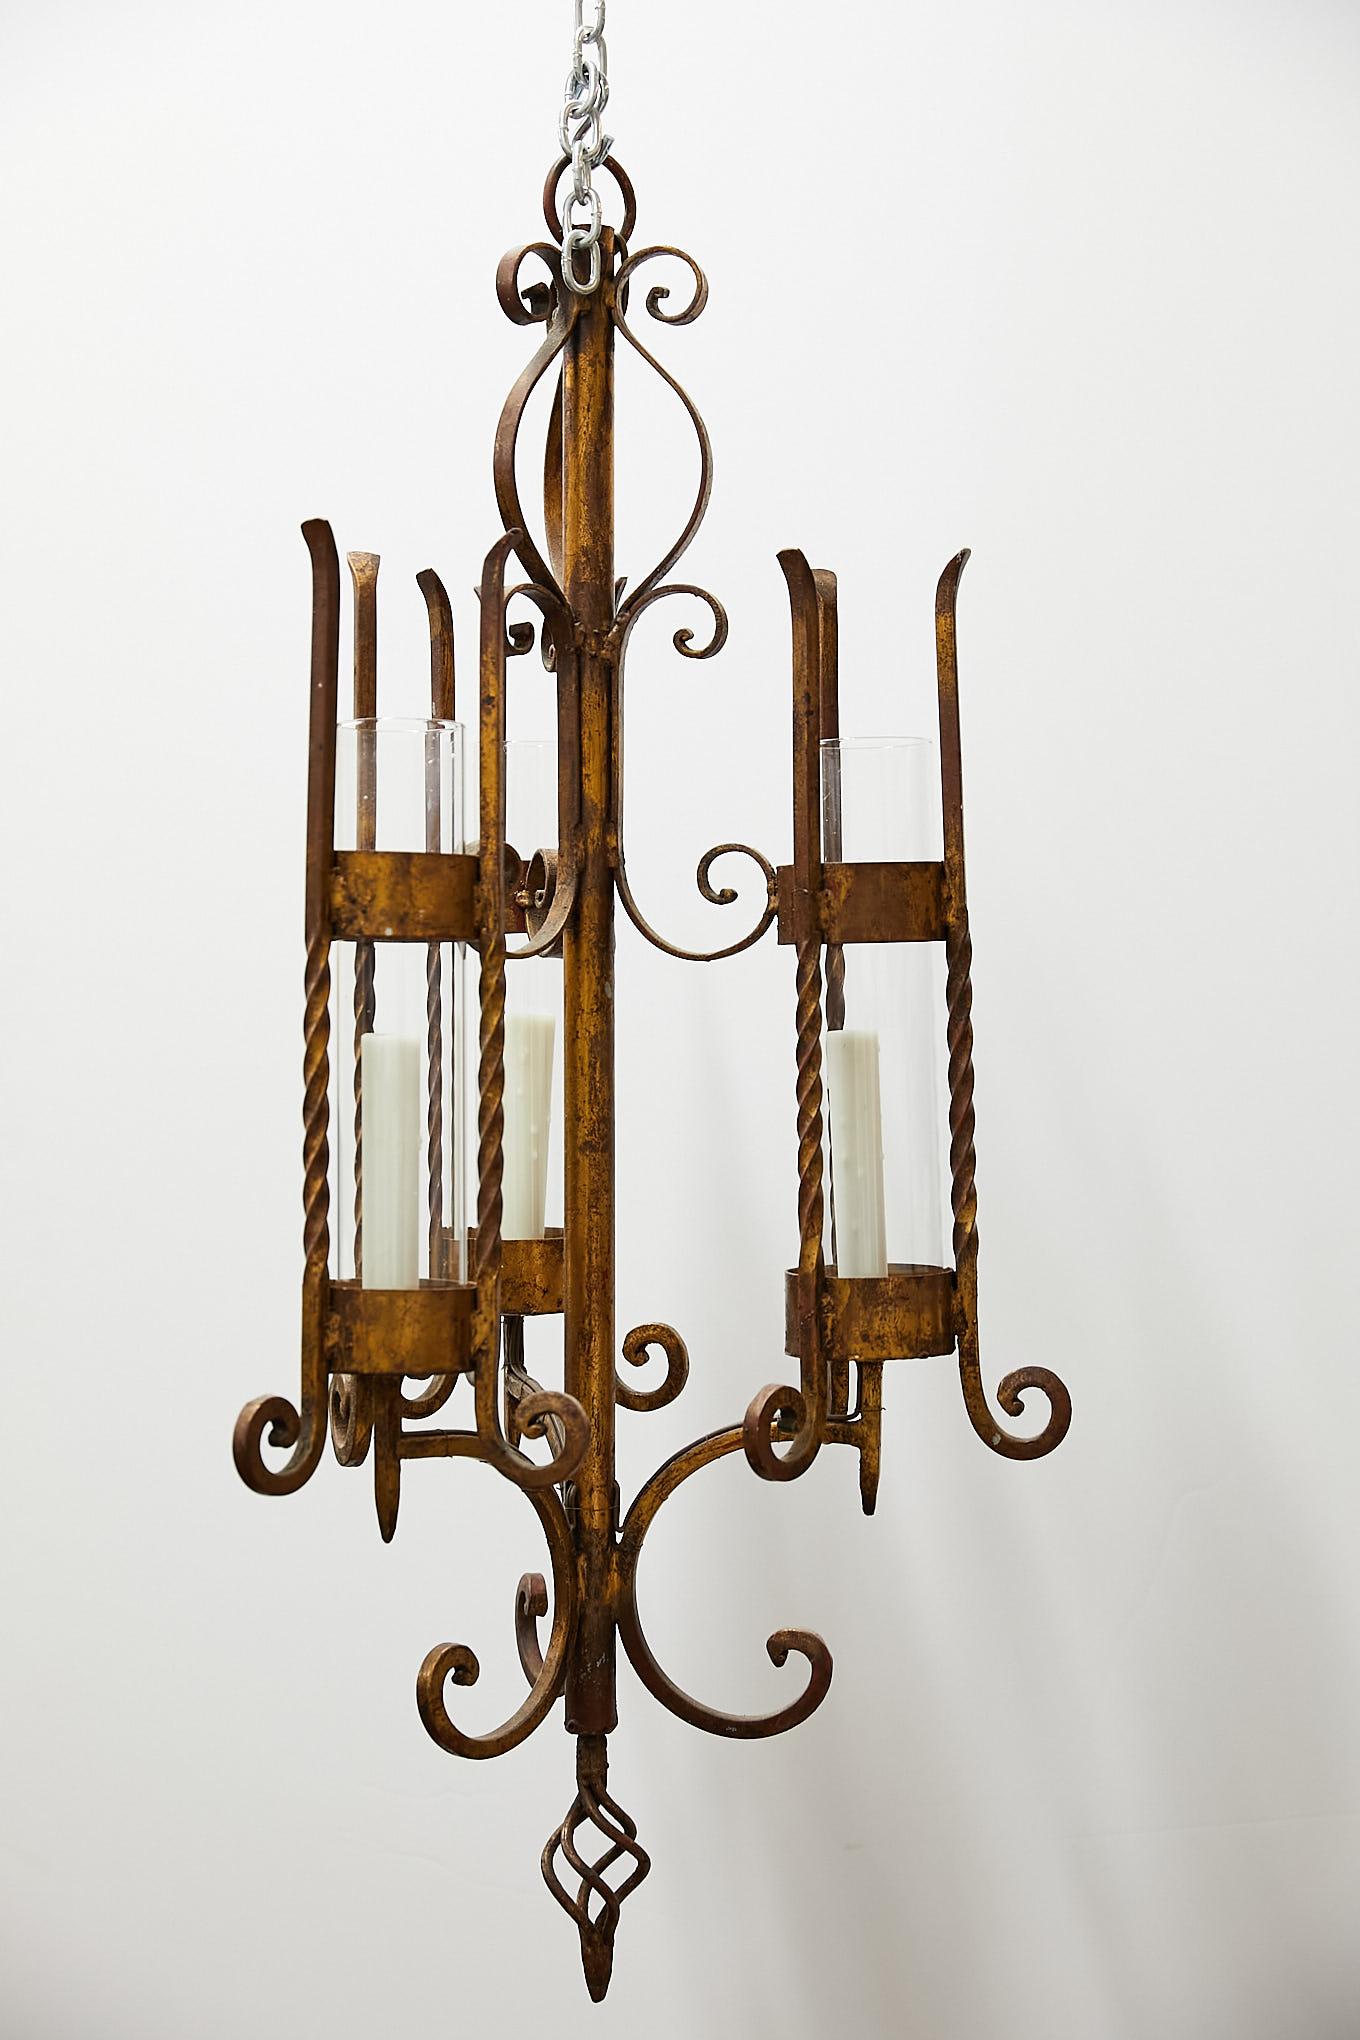 20th century Italian chandelier made of gilded wrought iron having three wired arms with twisted and scrolling candelabras holding waxed candle sleeves enclosed by glass chimney hurricane shades.